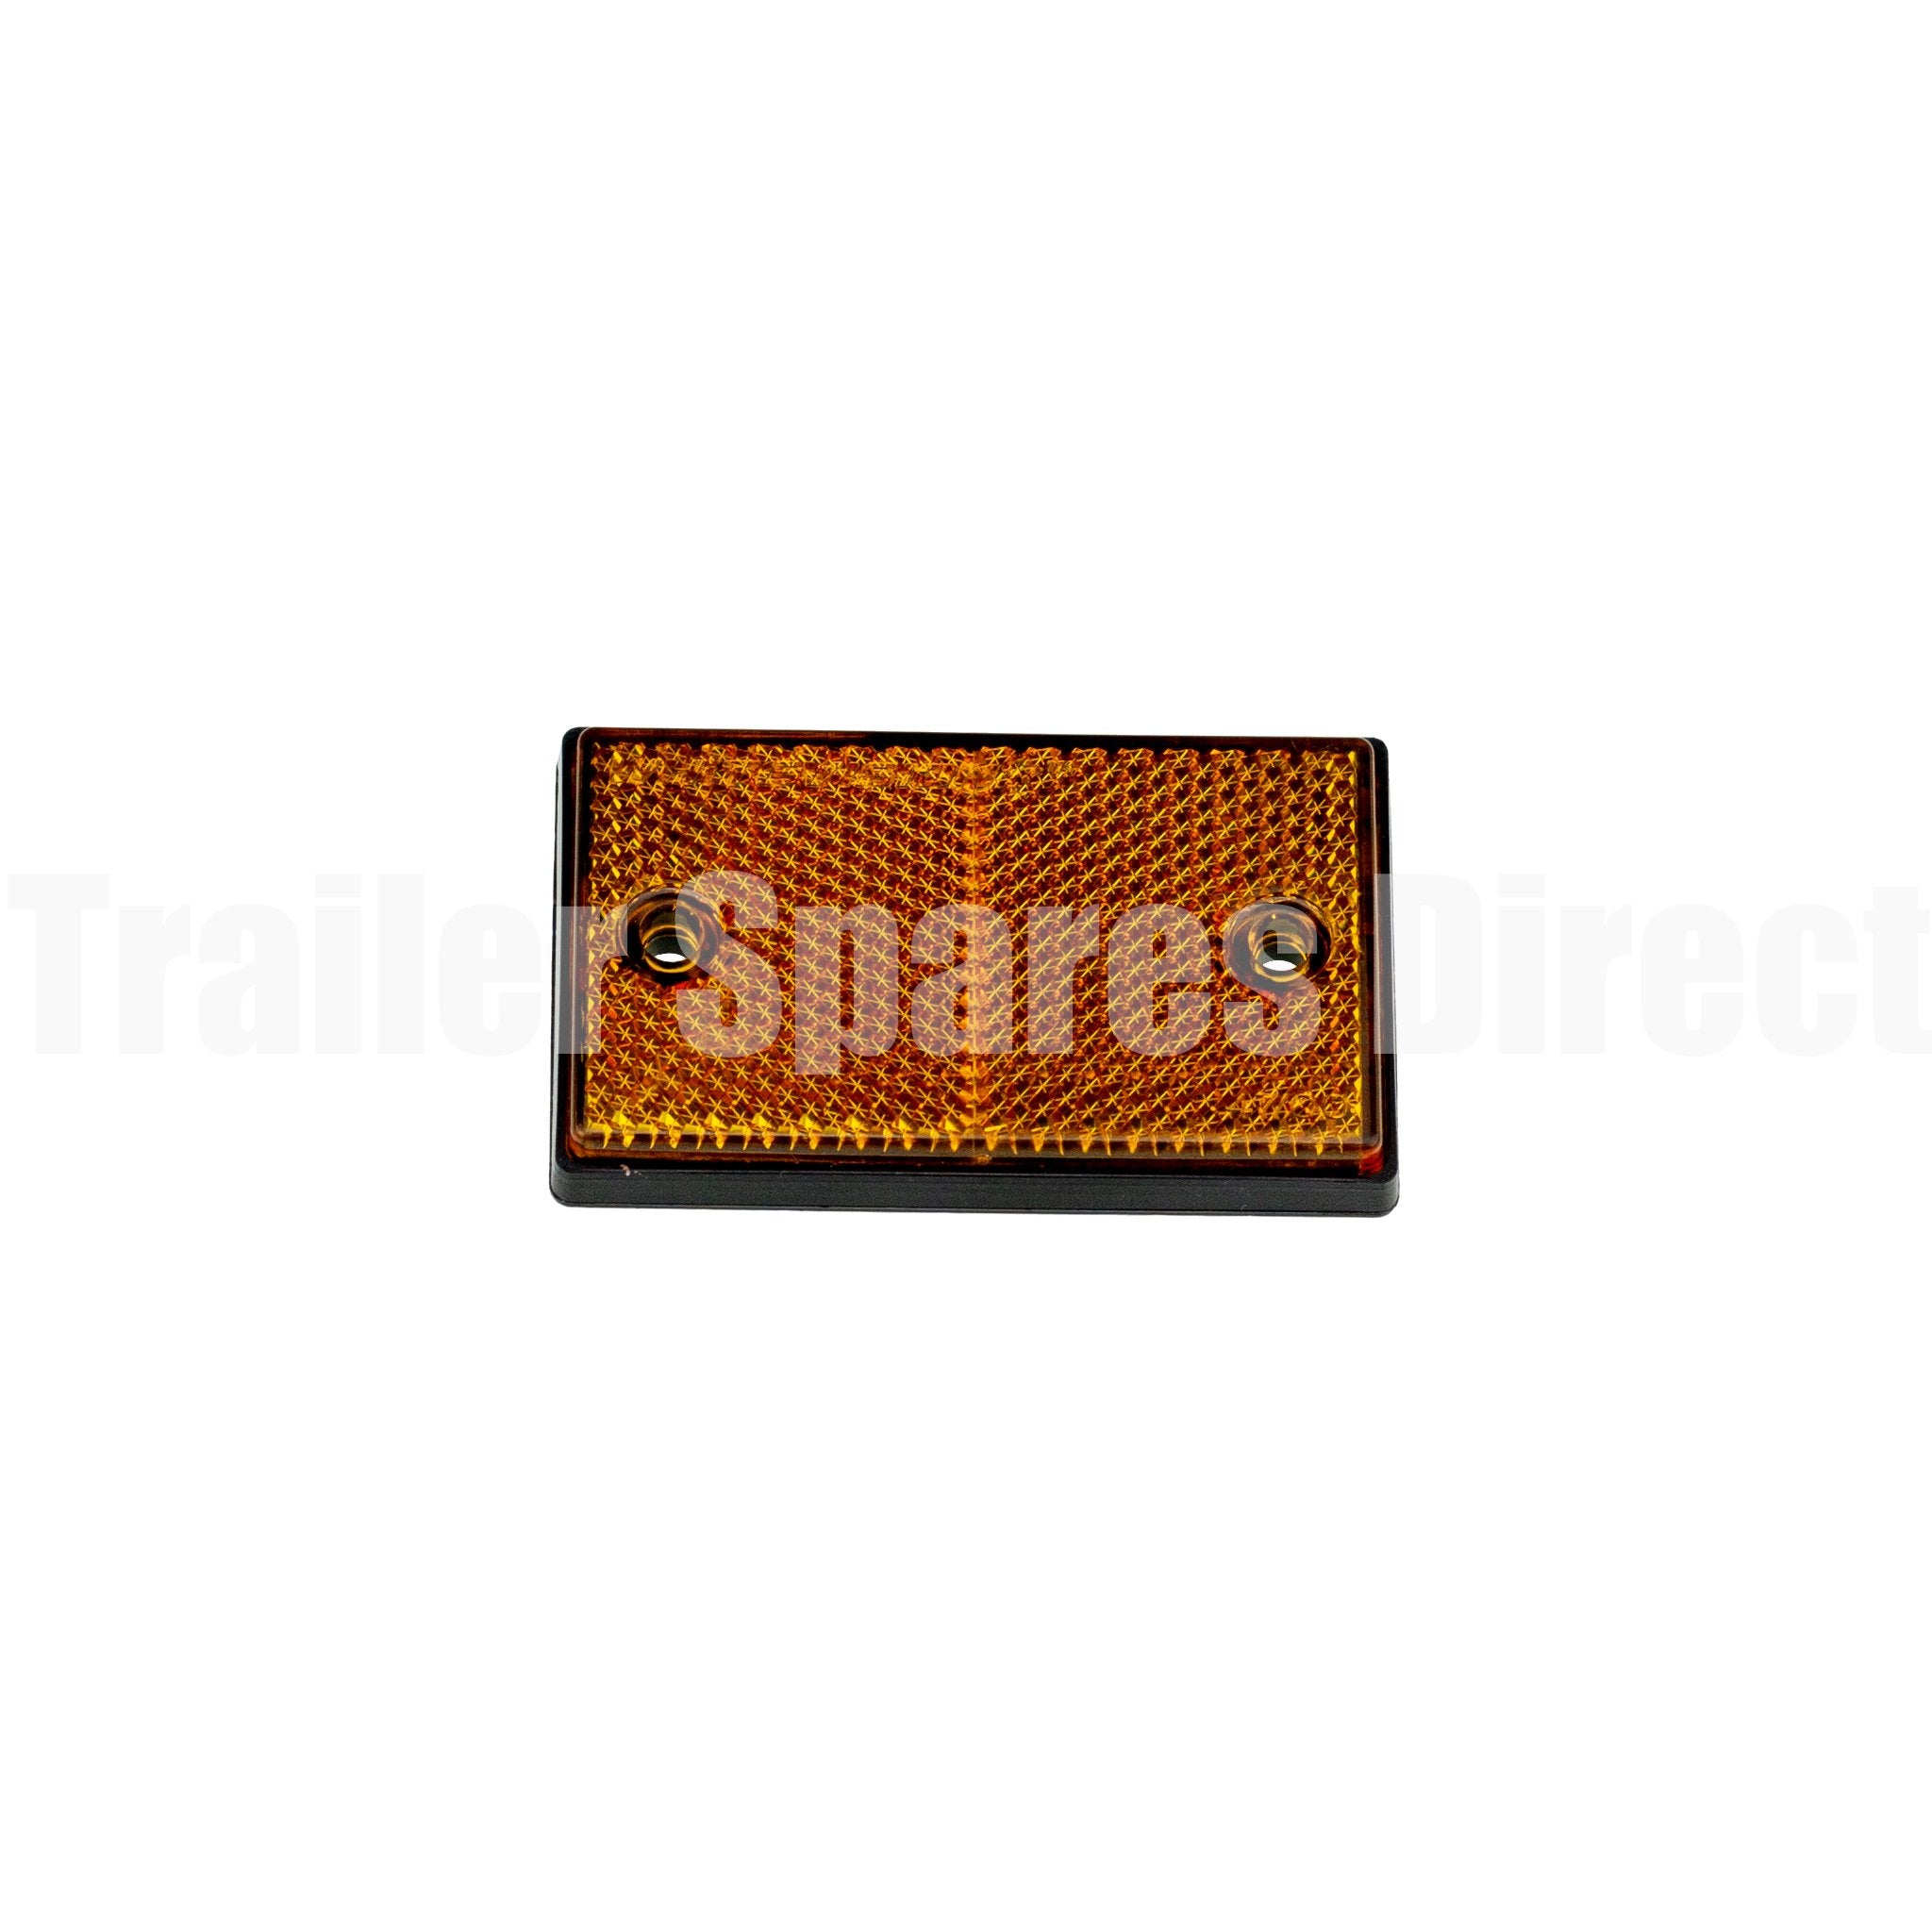 Reflector amber rectangle 75 x 45mm screw or adhesive